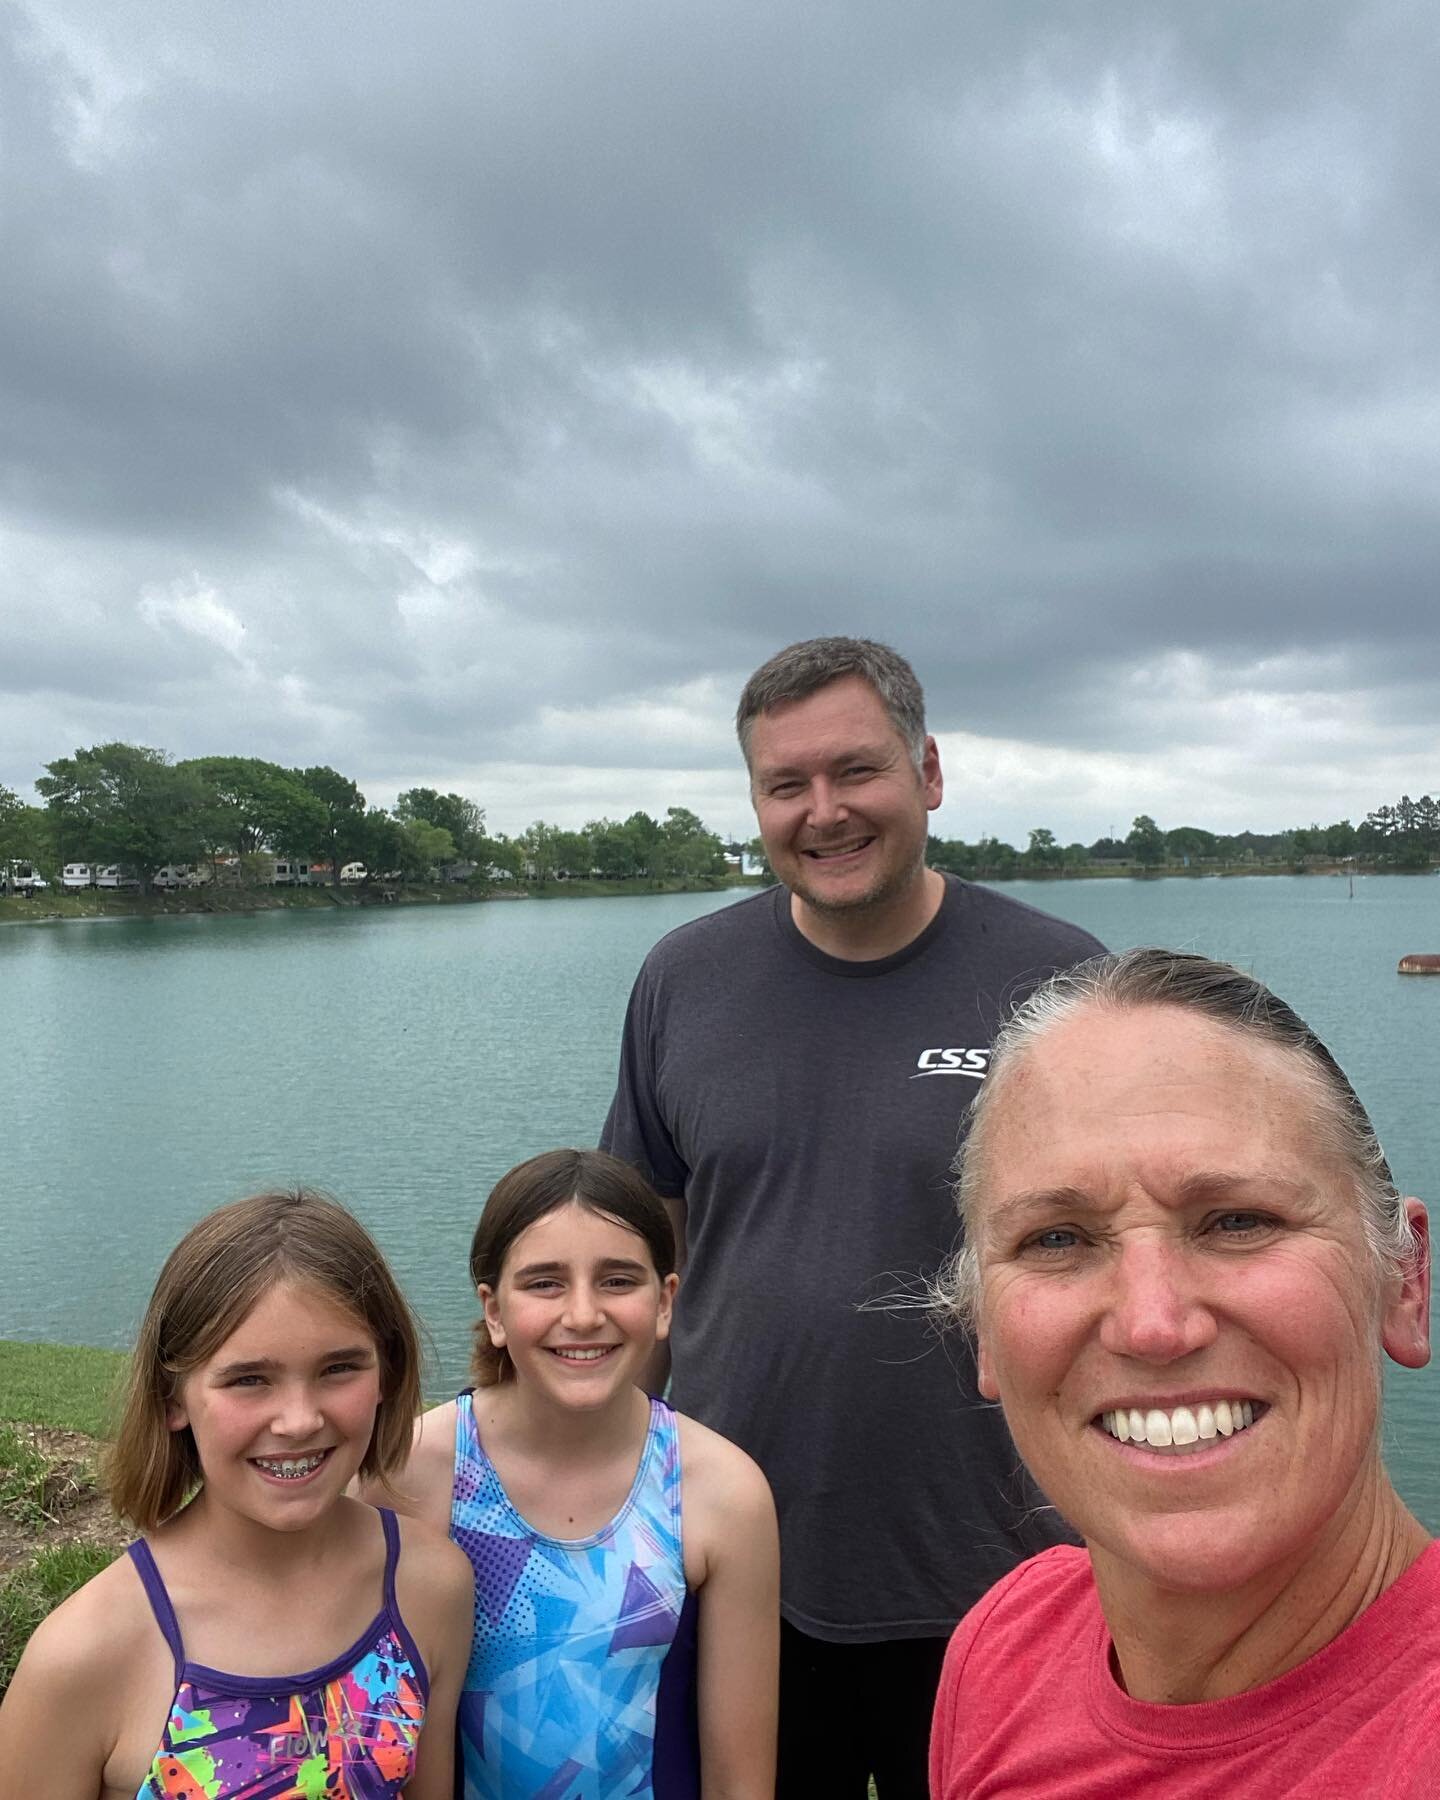 Had a great afternoon getting a short OWS with an athlete and my daughter and her friend. I got to try booties and cap for my chilly swim next weekend. We of course had to make a stop at Burger Barn to wrap up the whole experience. 

Tomorrow my daug